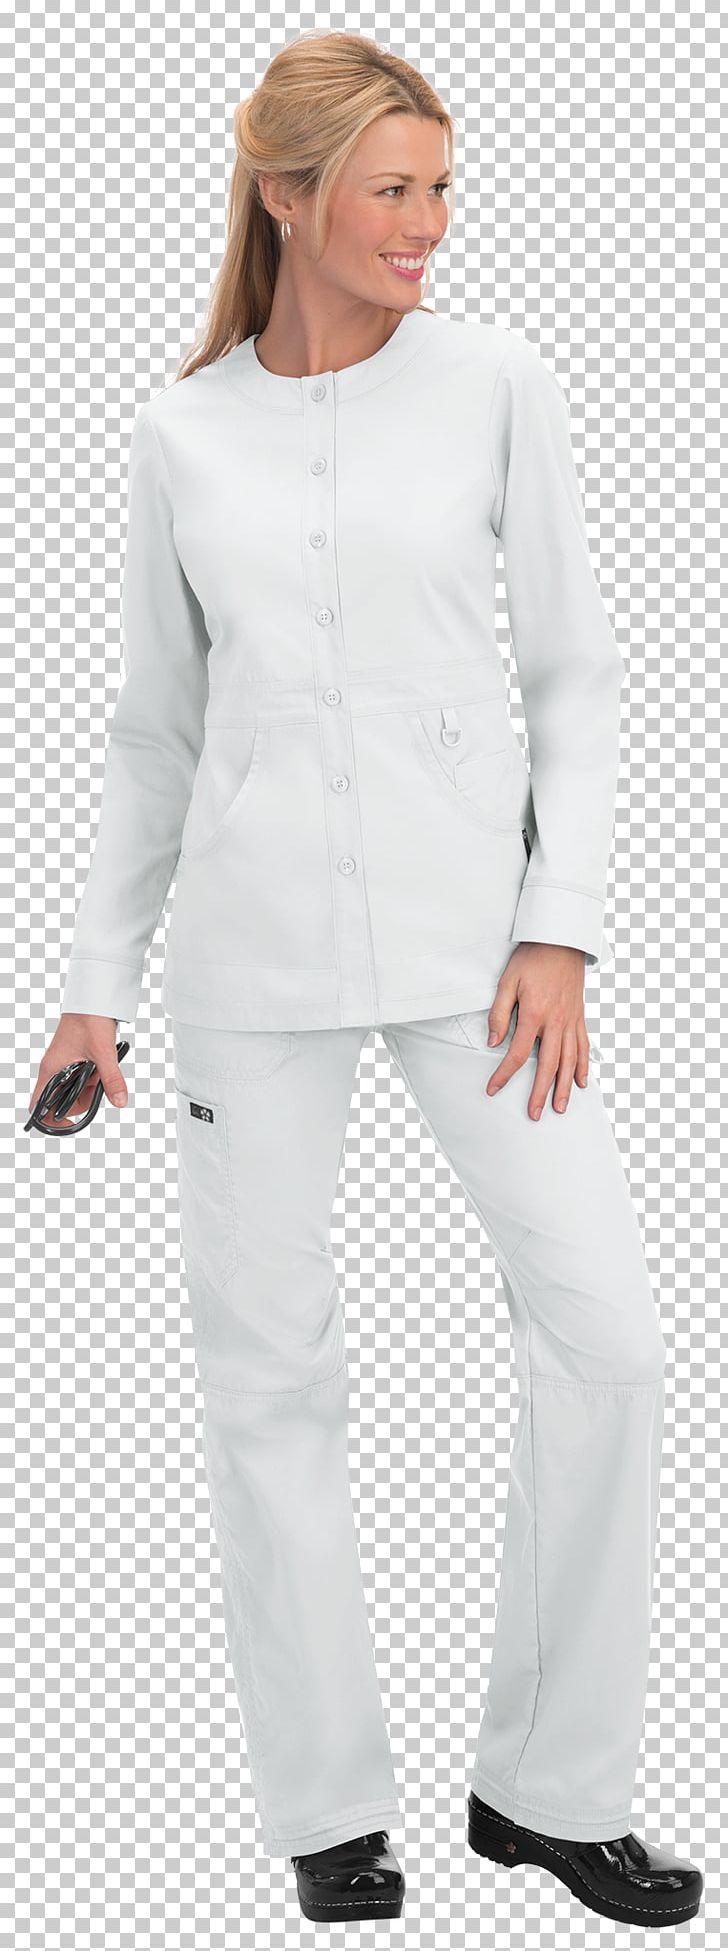 Sleeve Pants Lab Coats Clothing Jacket PNG, Clipart, Abdomen, Clothing, Coat, Costume, Jacket Free PNG Download